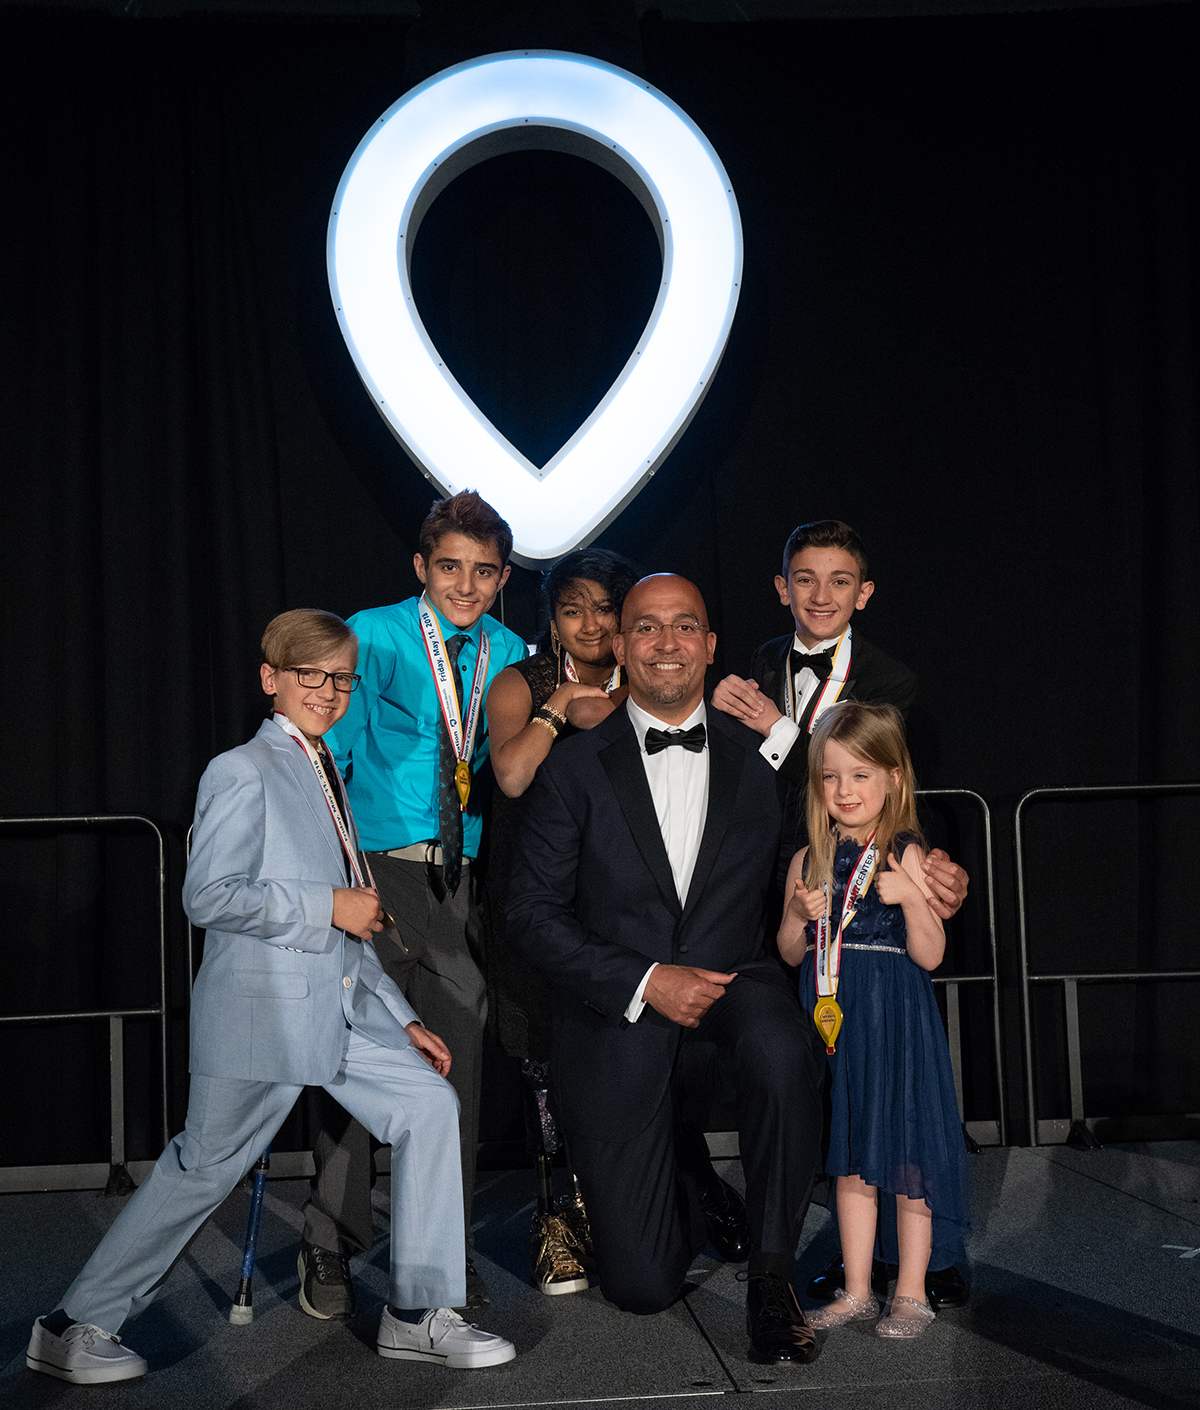 Penn State Football Coach James Franklin, wearing a tuxedo, kneels on one knee. Around him are five young children. An illuminated CMN logo is in the background.